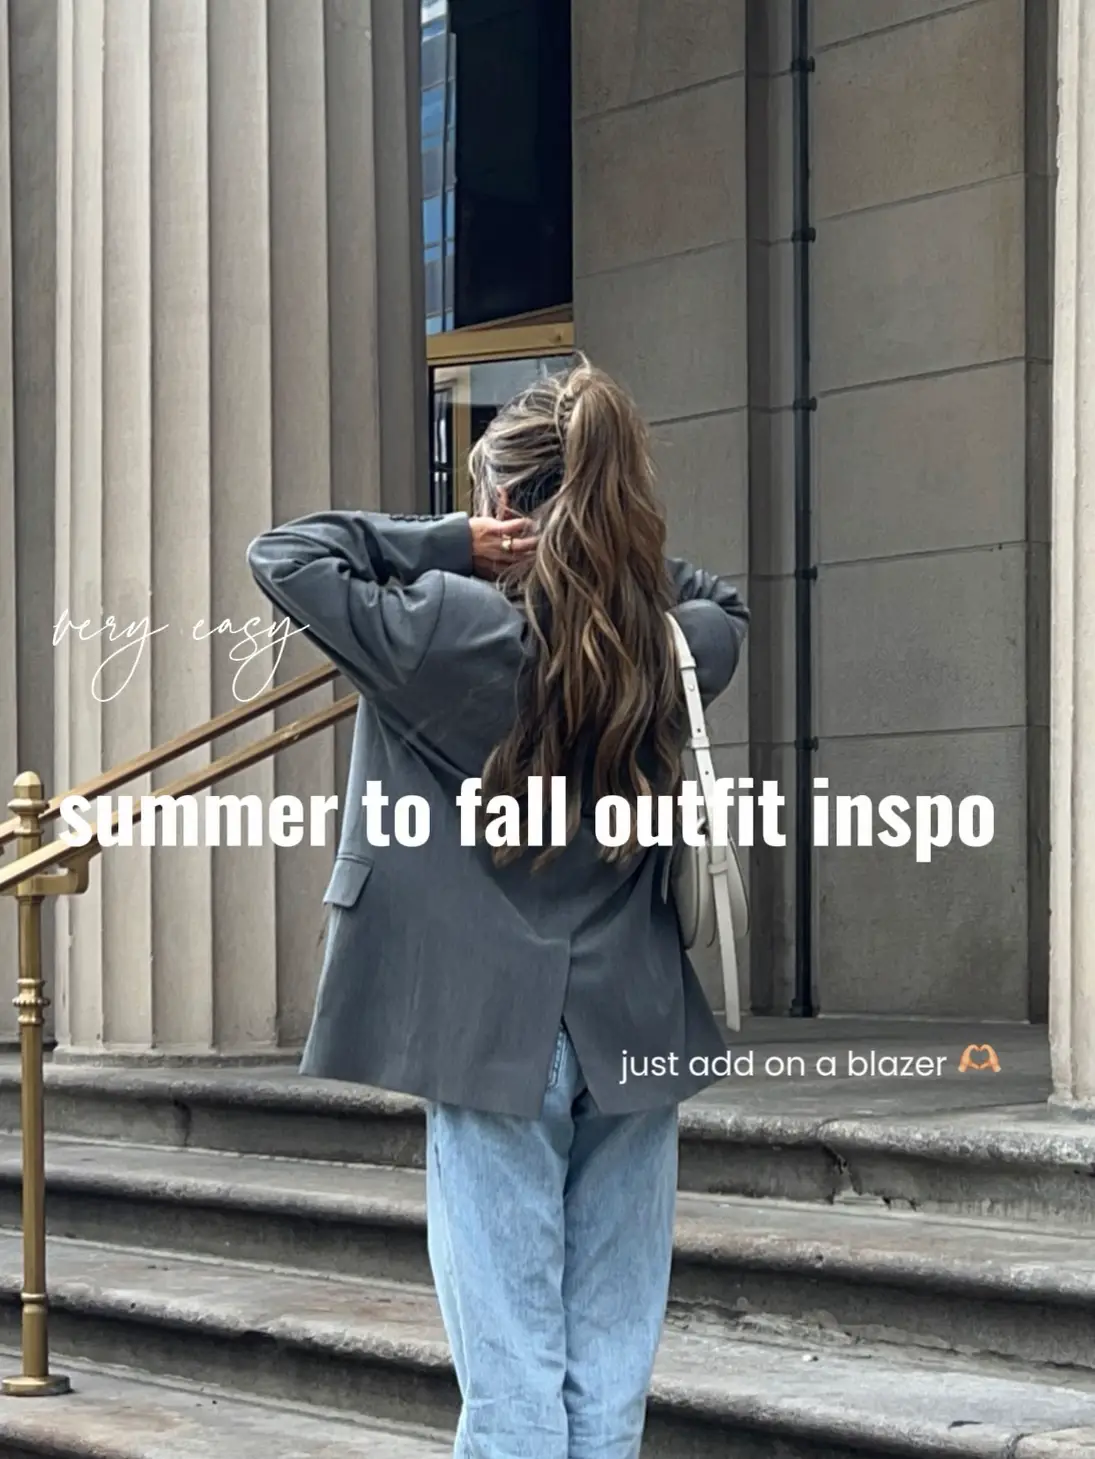 summer to fall fit: add a blazer 🫶🏼's images